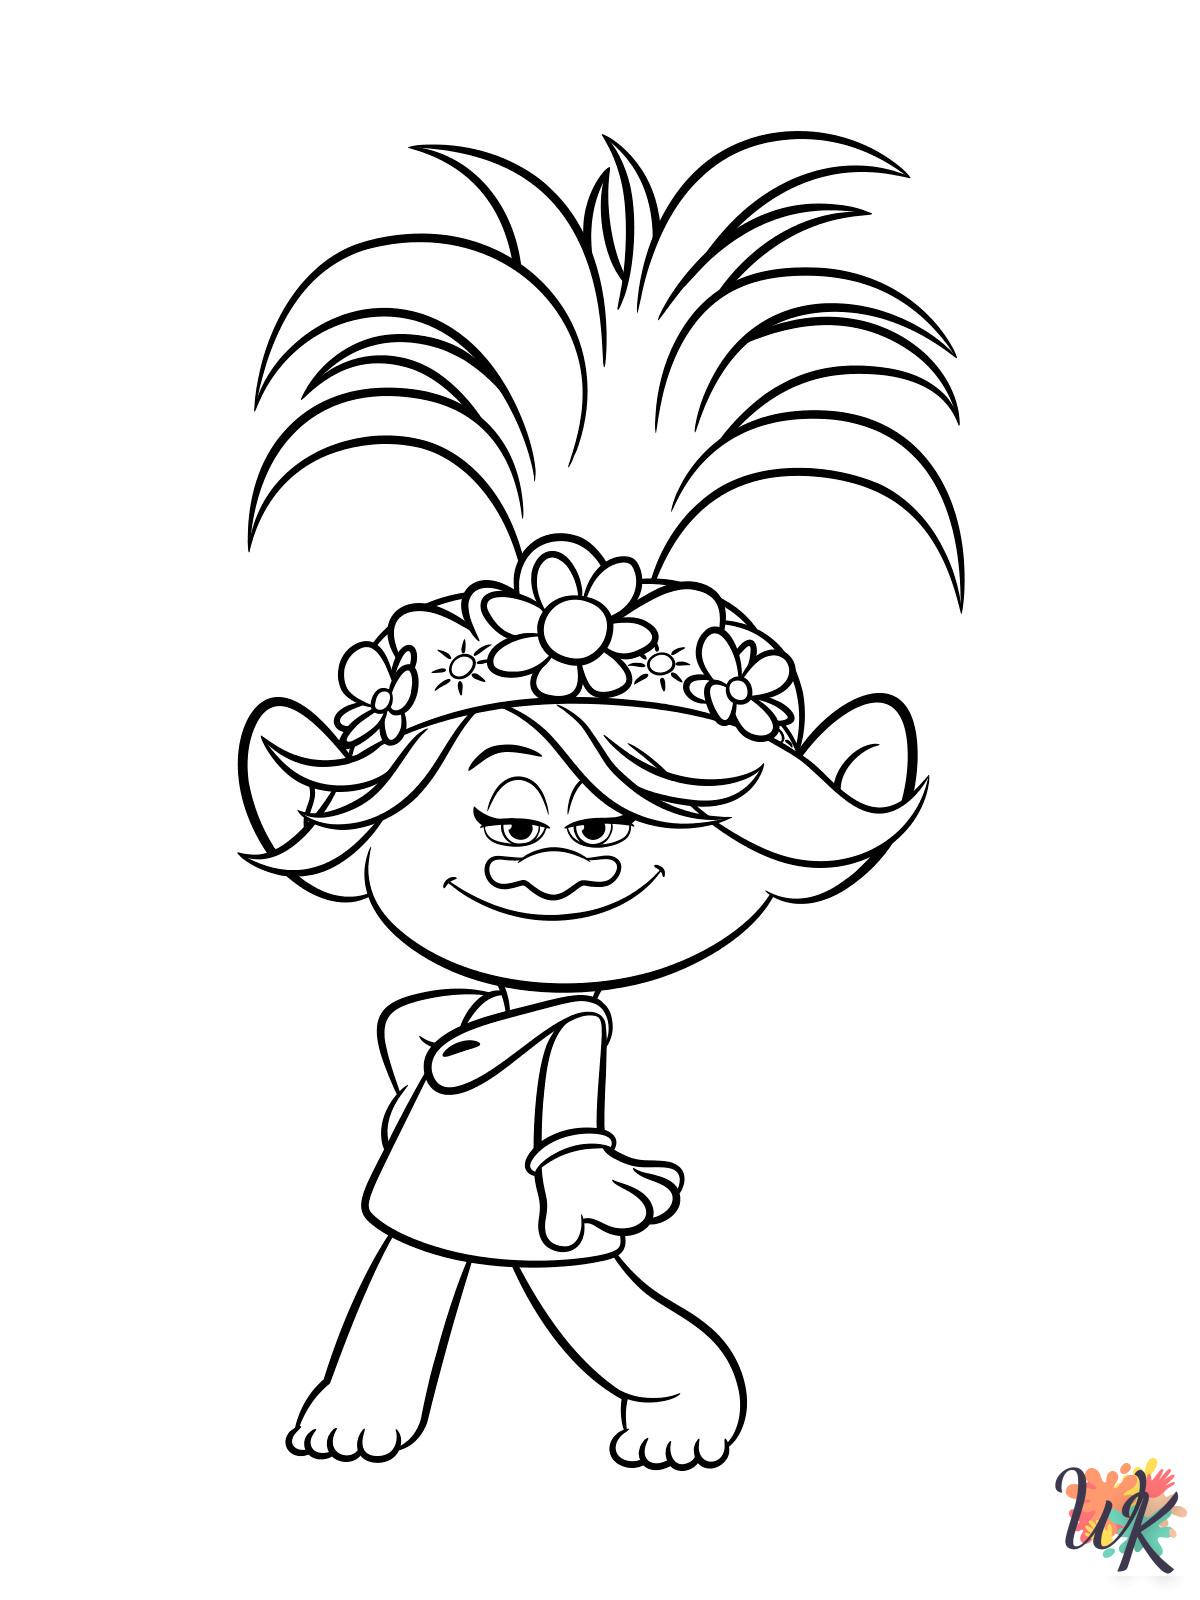 easy cute Trolls coloring pages